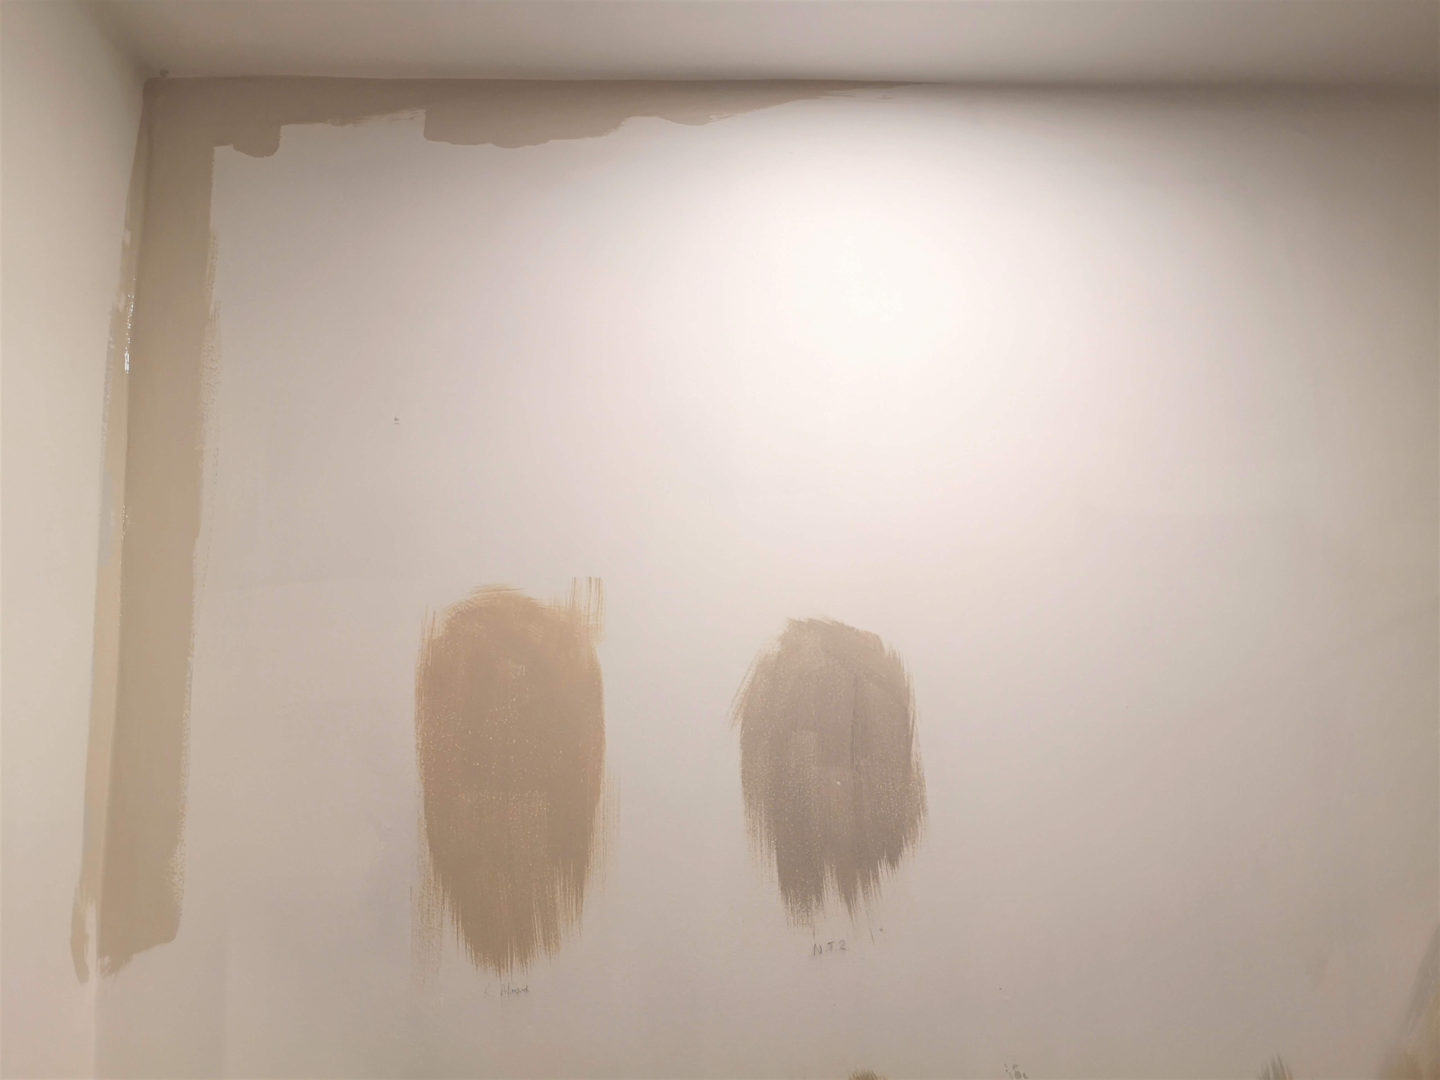 A blank wall with the edge of a corner painted.